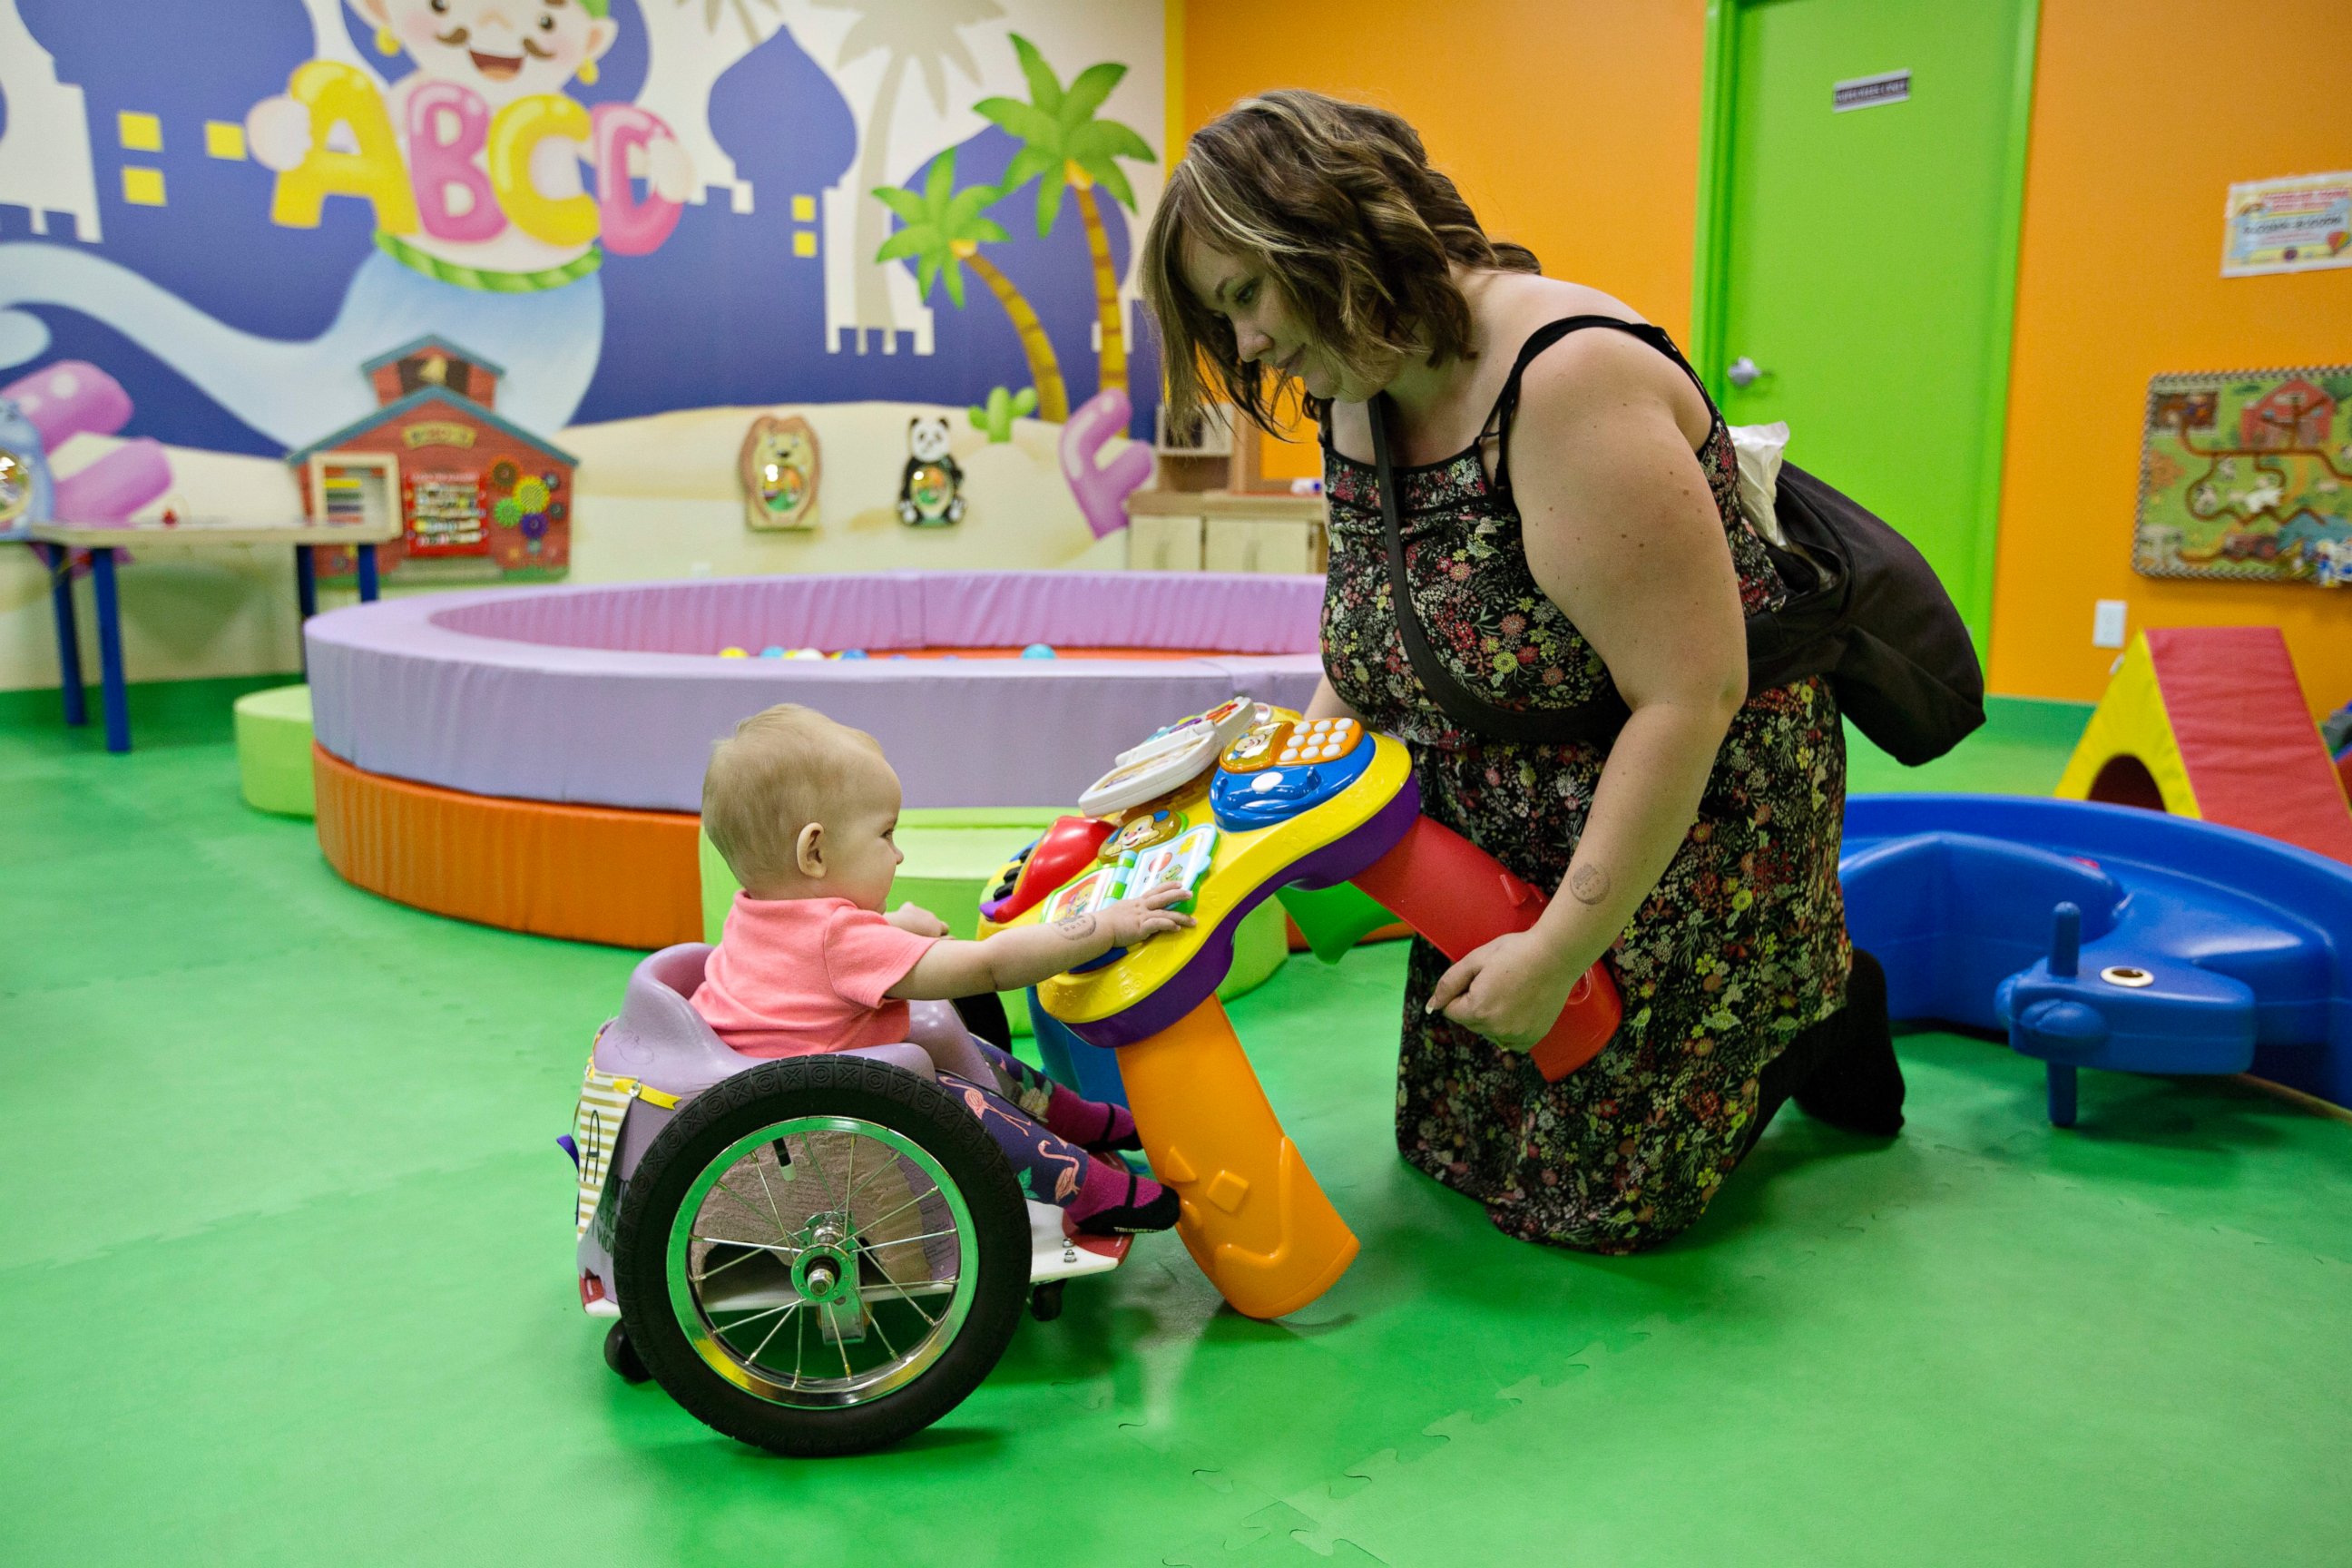 PHOTO: Kim Moore and her one-year-old daughter Evelyn Moore play at an indoor play ground in Edmonton Alberta, Canada, Aug. 9, 2016. Evelyn, also called Eva by her family, was diagnosed with cancer following her four-month check up.